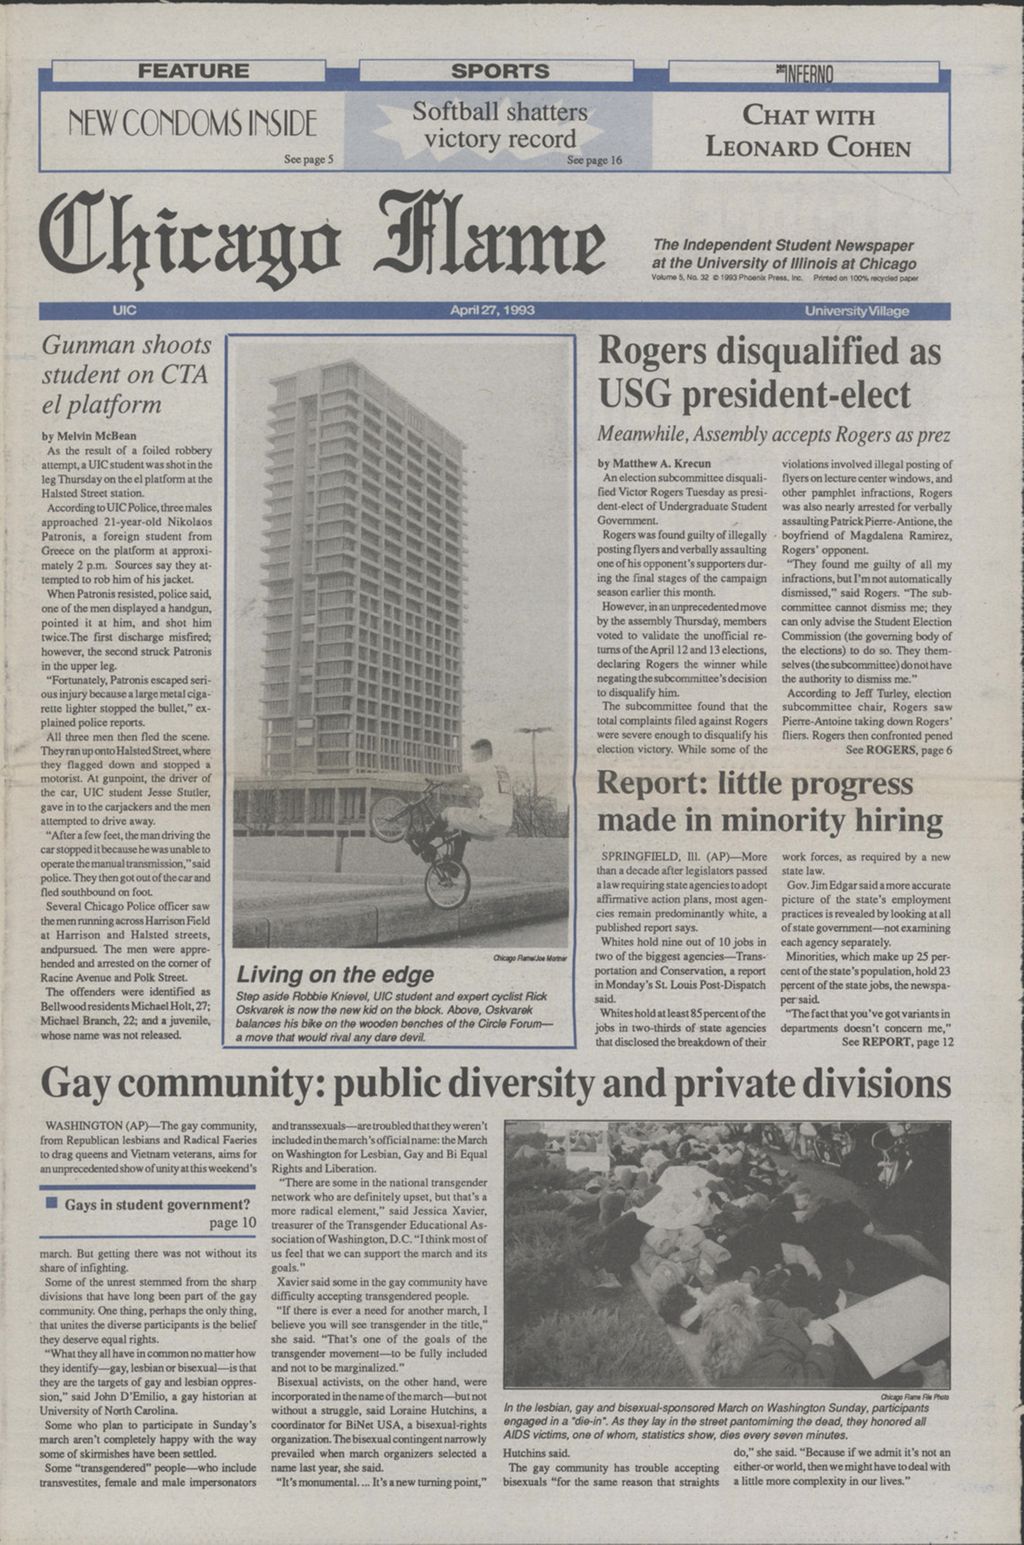 Miniature of Chicago Flame (April 27, 1993)